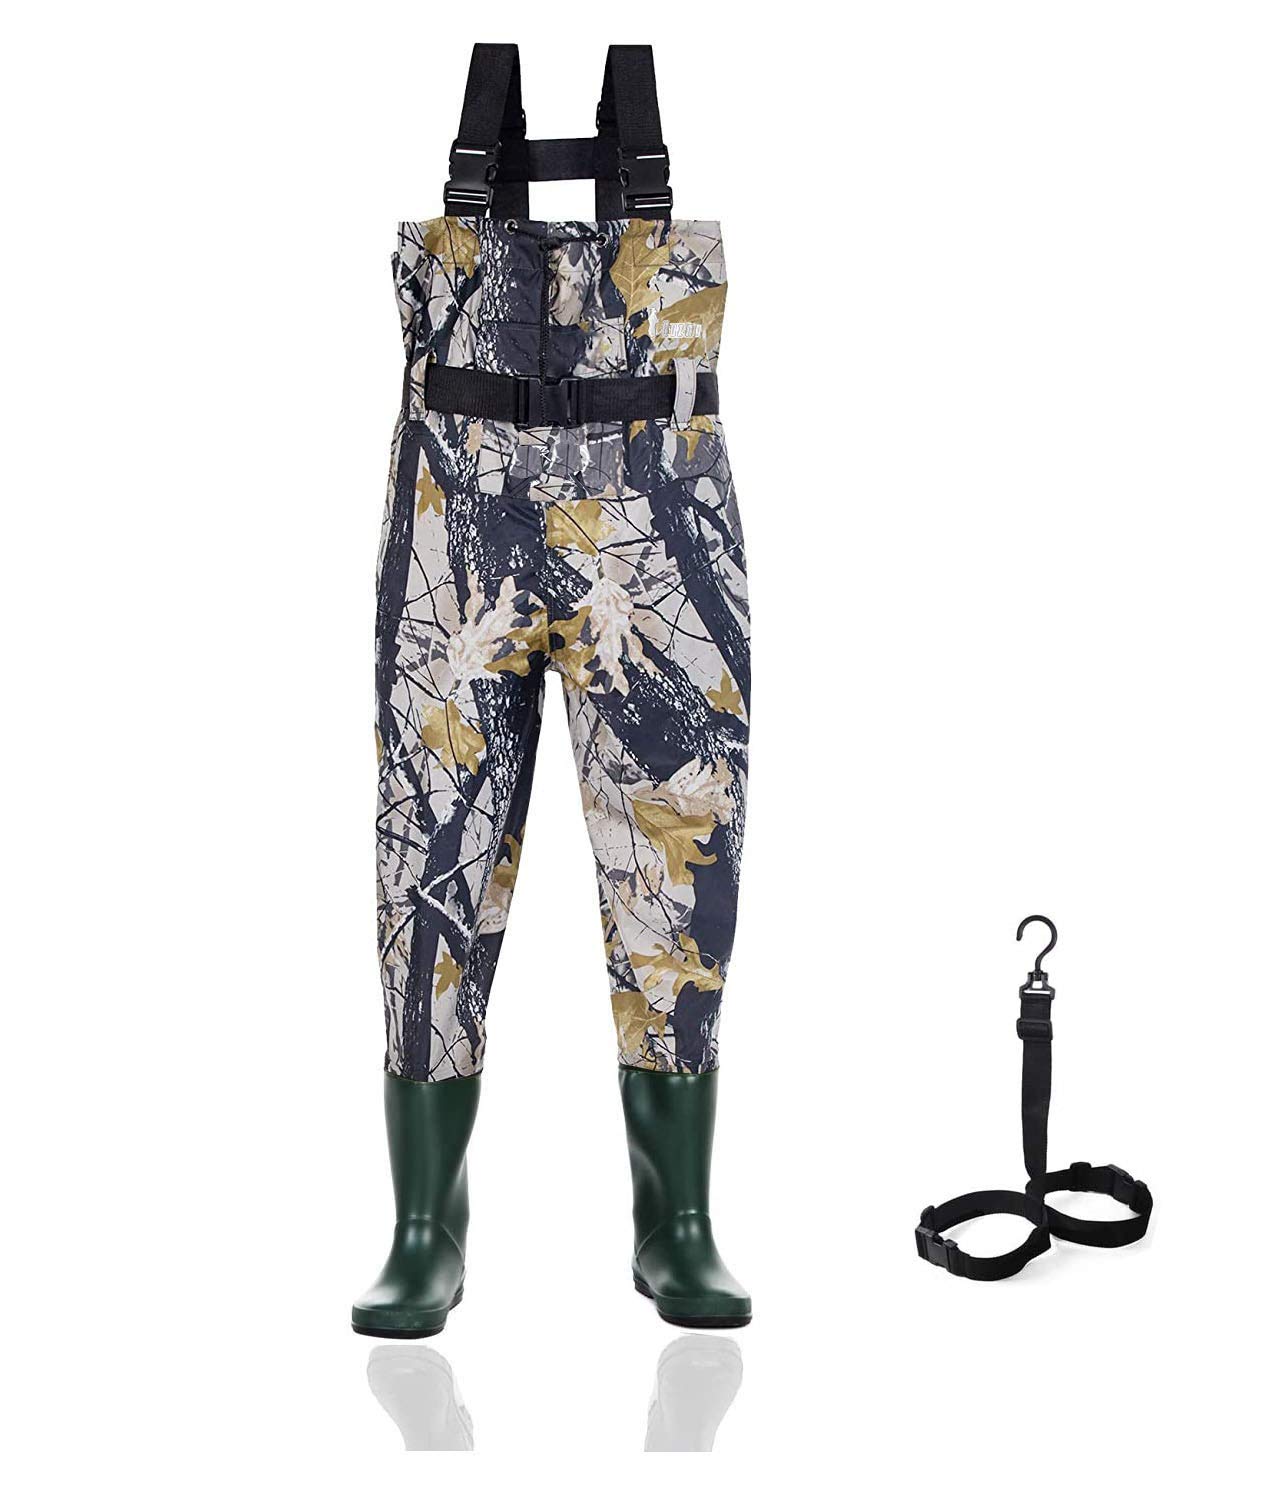 Kids Chest Waders for Toddler Children Waterproof Youth Fishing Waders for  Boys Girls Hunting Waders with Insulated Boots Camo 4/5